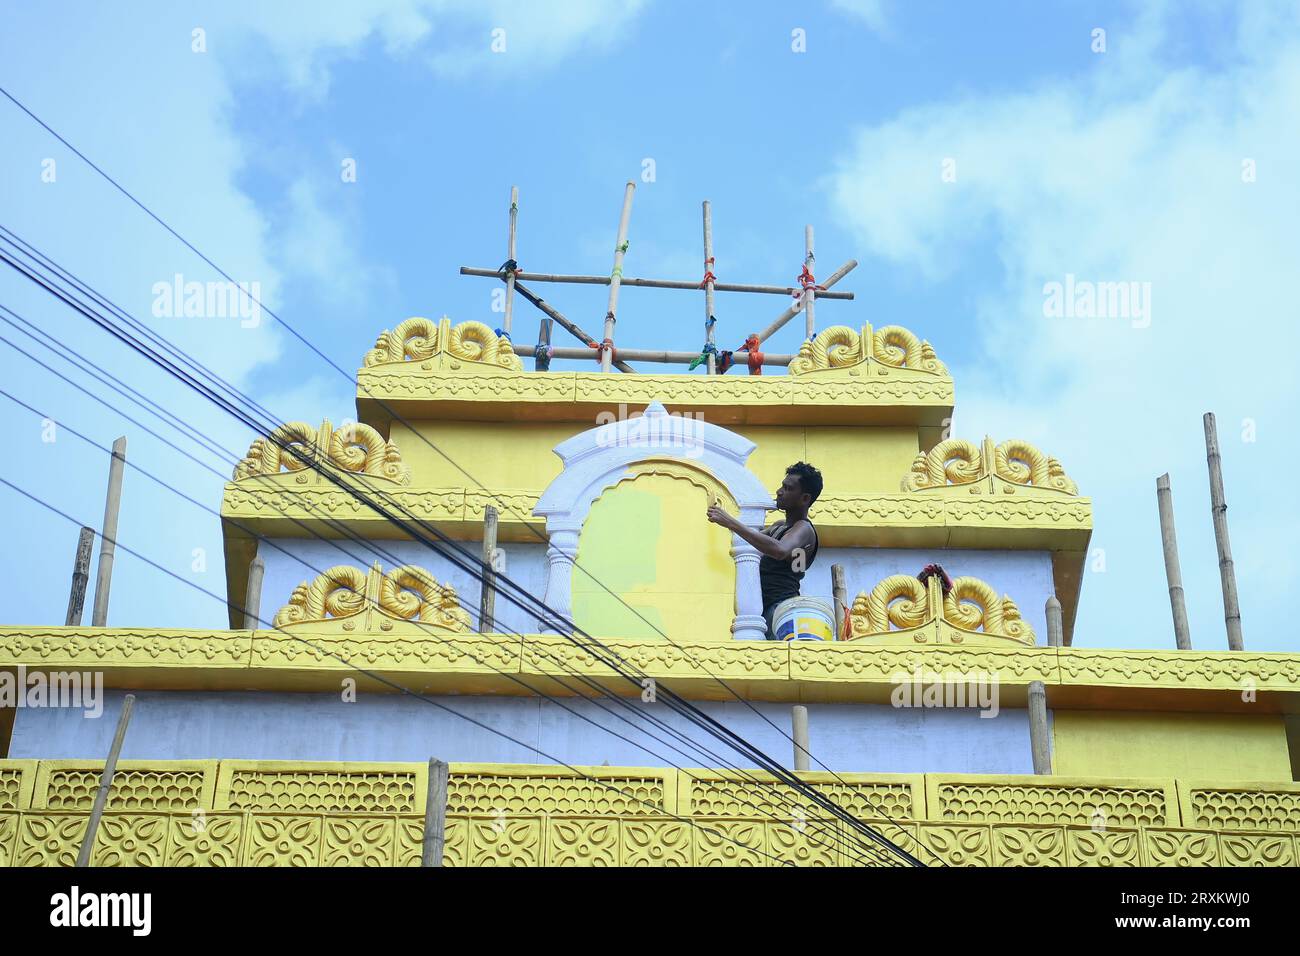 Workers are making a pandal, a temporary structure set up to usually venerate the God and Goddess, ahead of Ganesh Chaturthi festival in Agartala. Tripura. India. Stock Photo